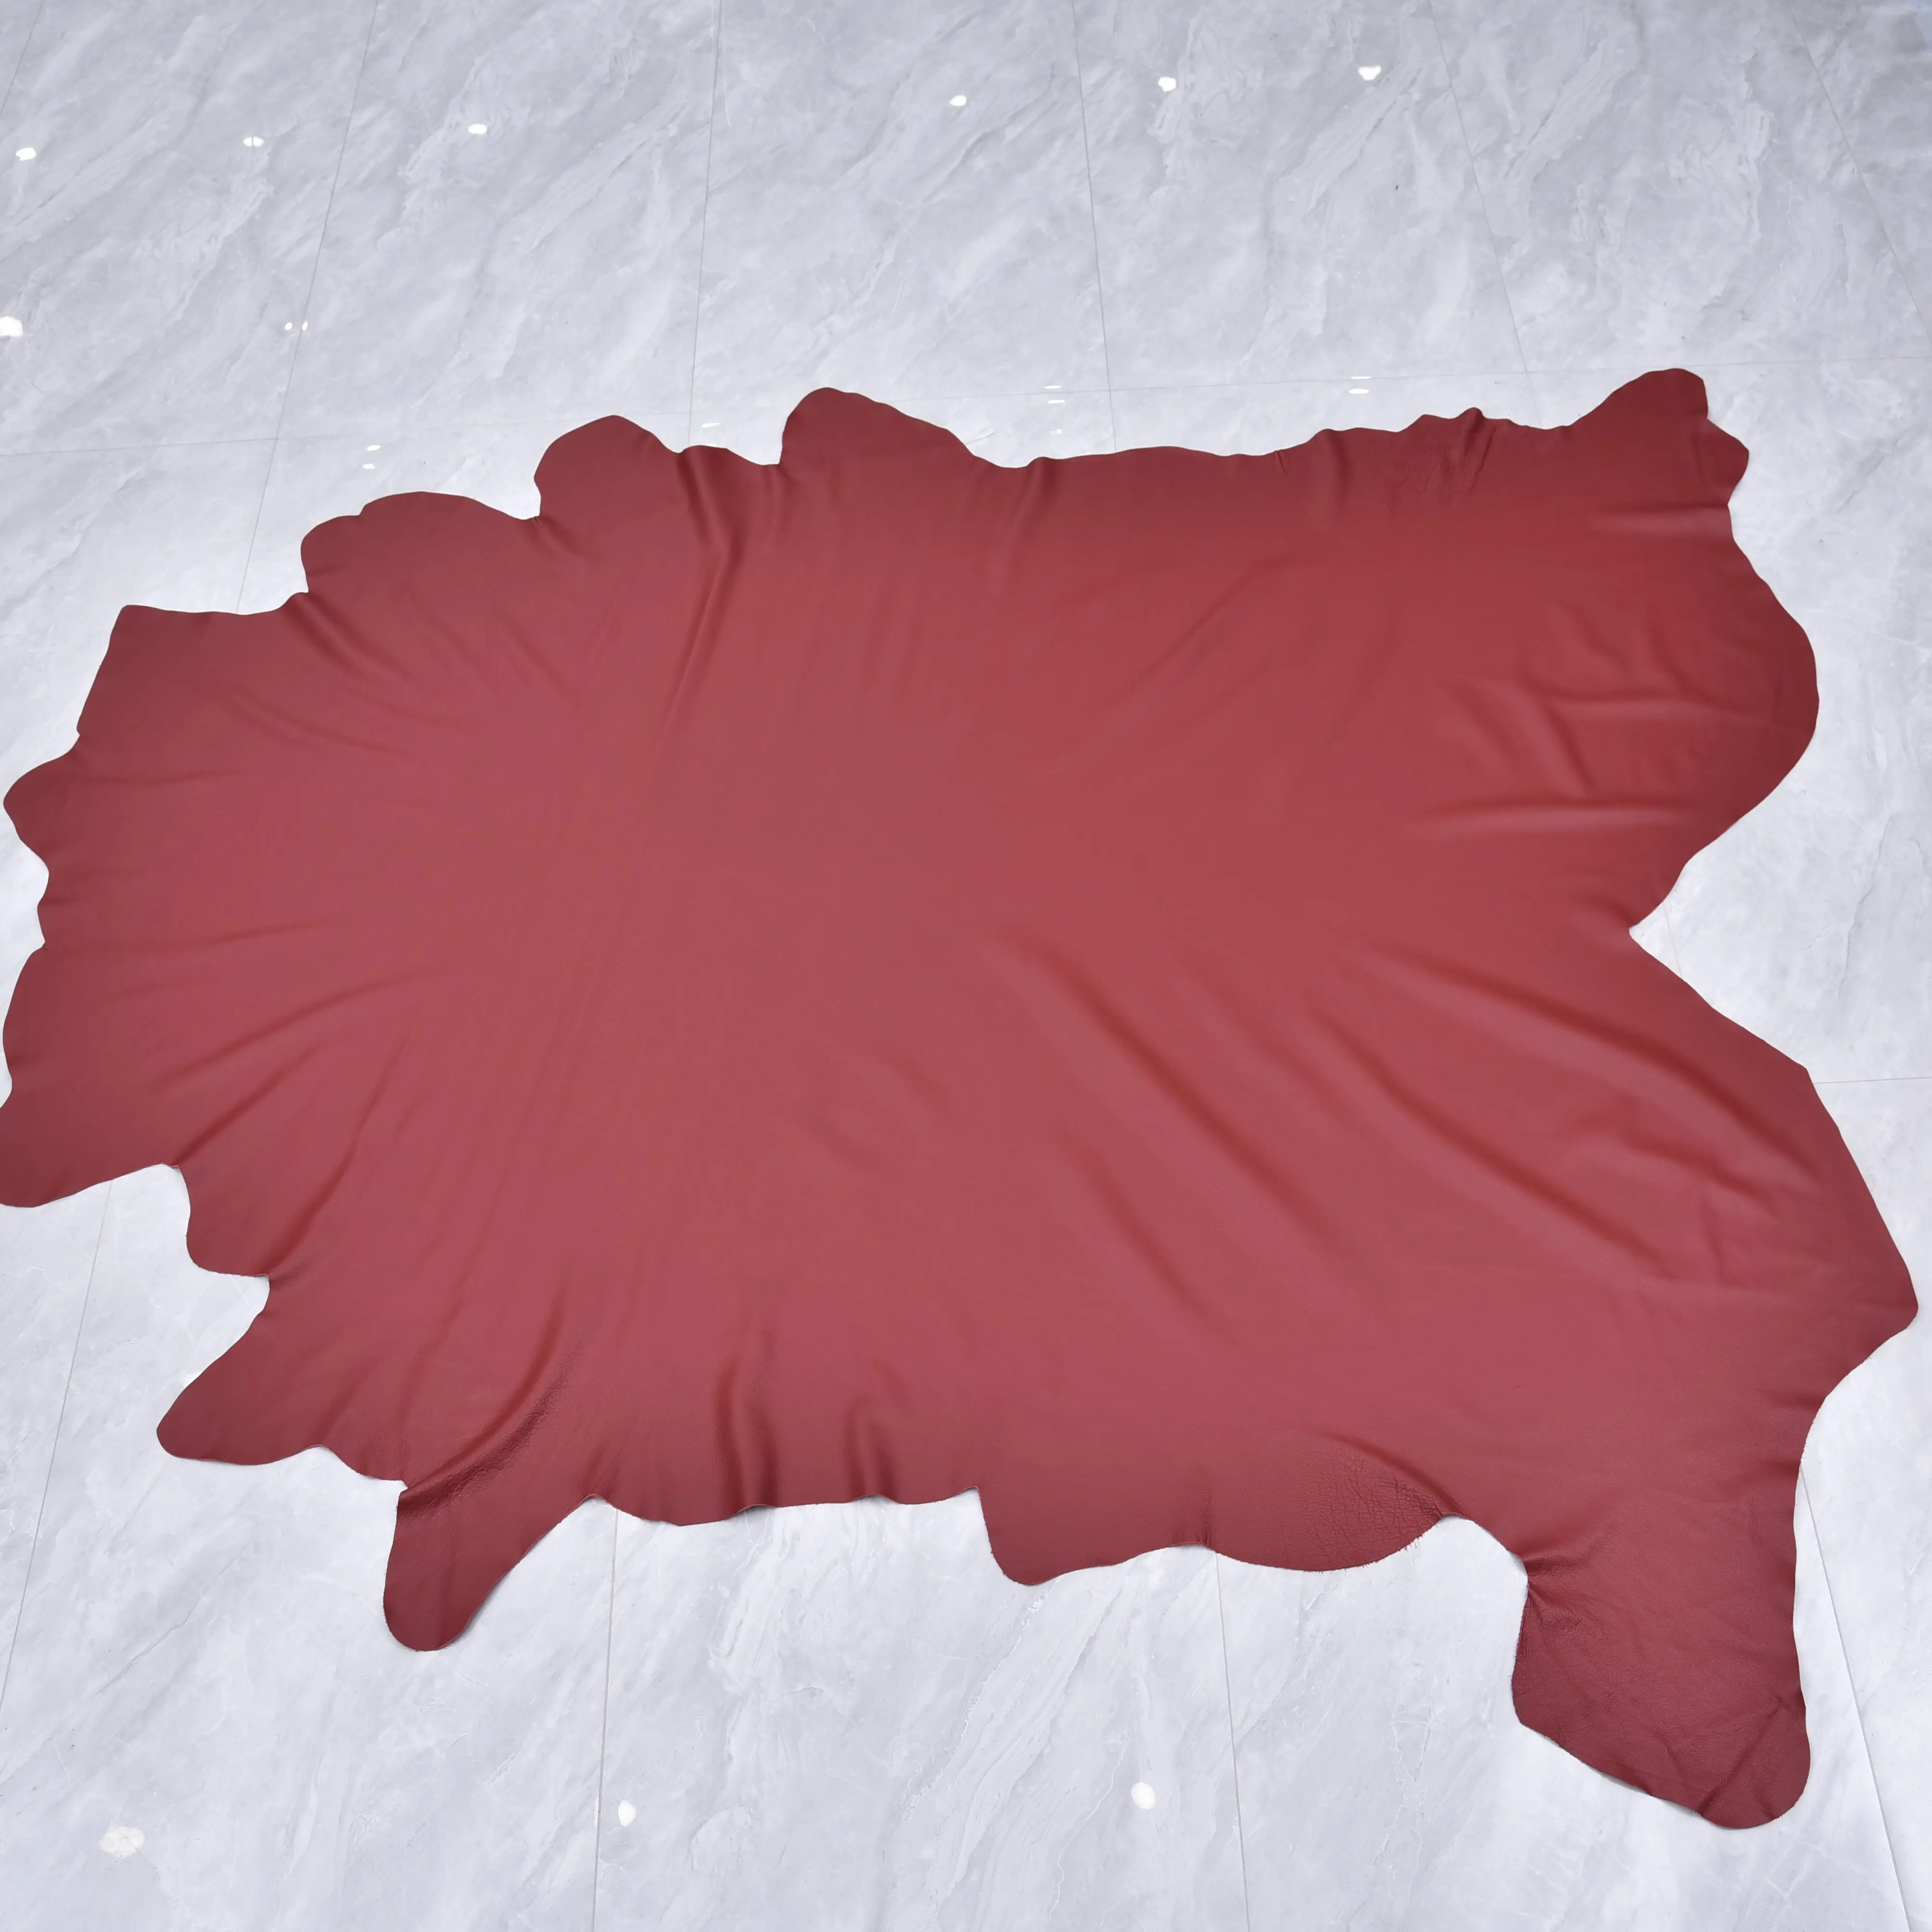 100% pure leather comfortable soft material whole soft genuine cowskin cow leather cowhide fabric for bed